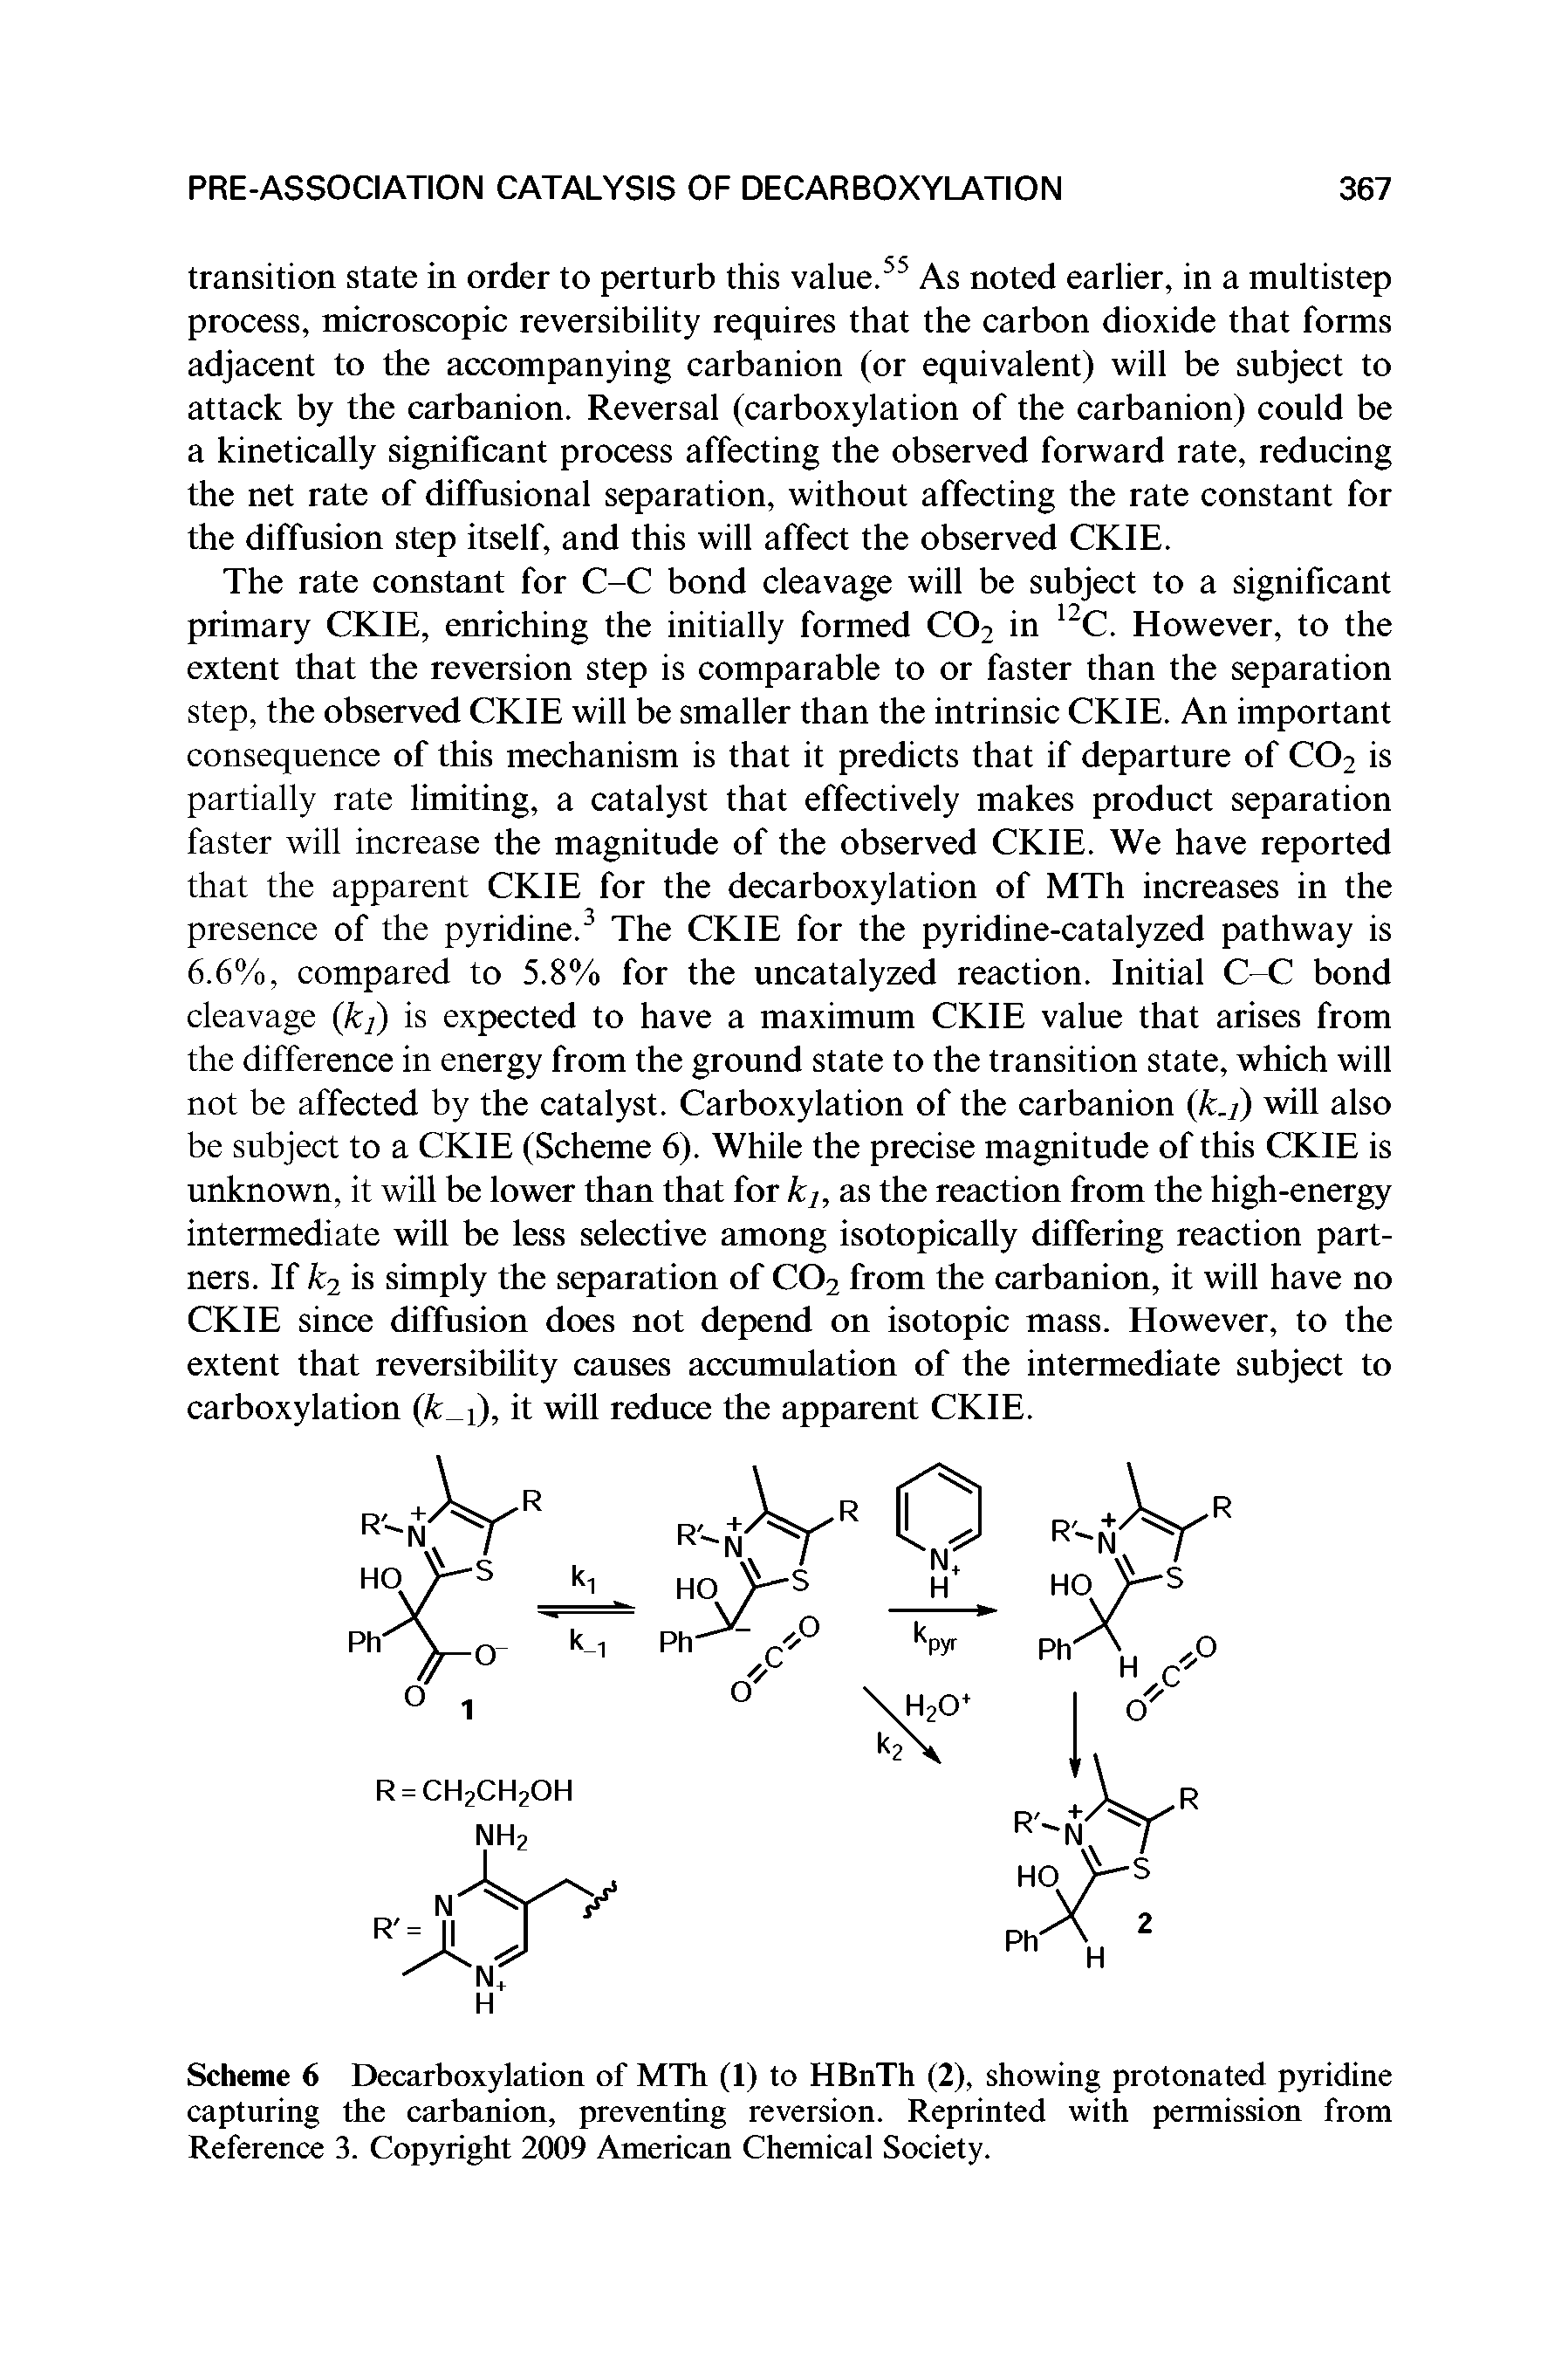 Scheme 6 Decarboxylation of MTh (1) to HBnTh (2), showing protonated pyridine capturing the carbanion, preventing reversion. Reprinted with permission from Reference 3. Copyright 2009 American Chemical Society.